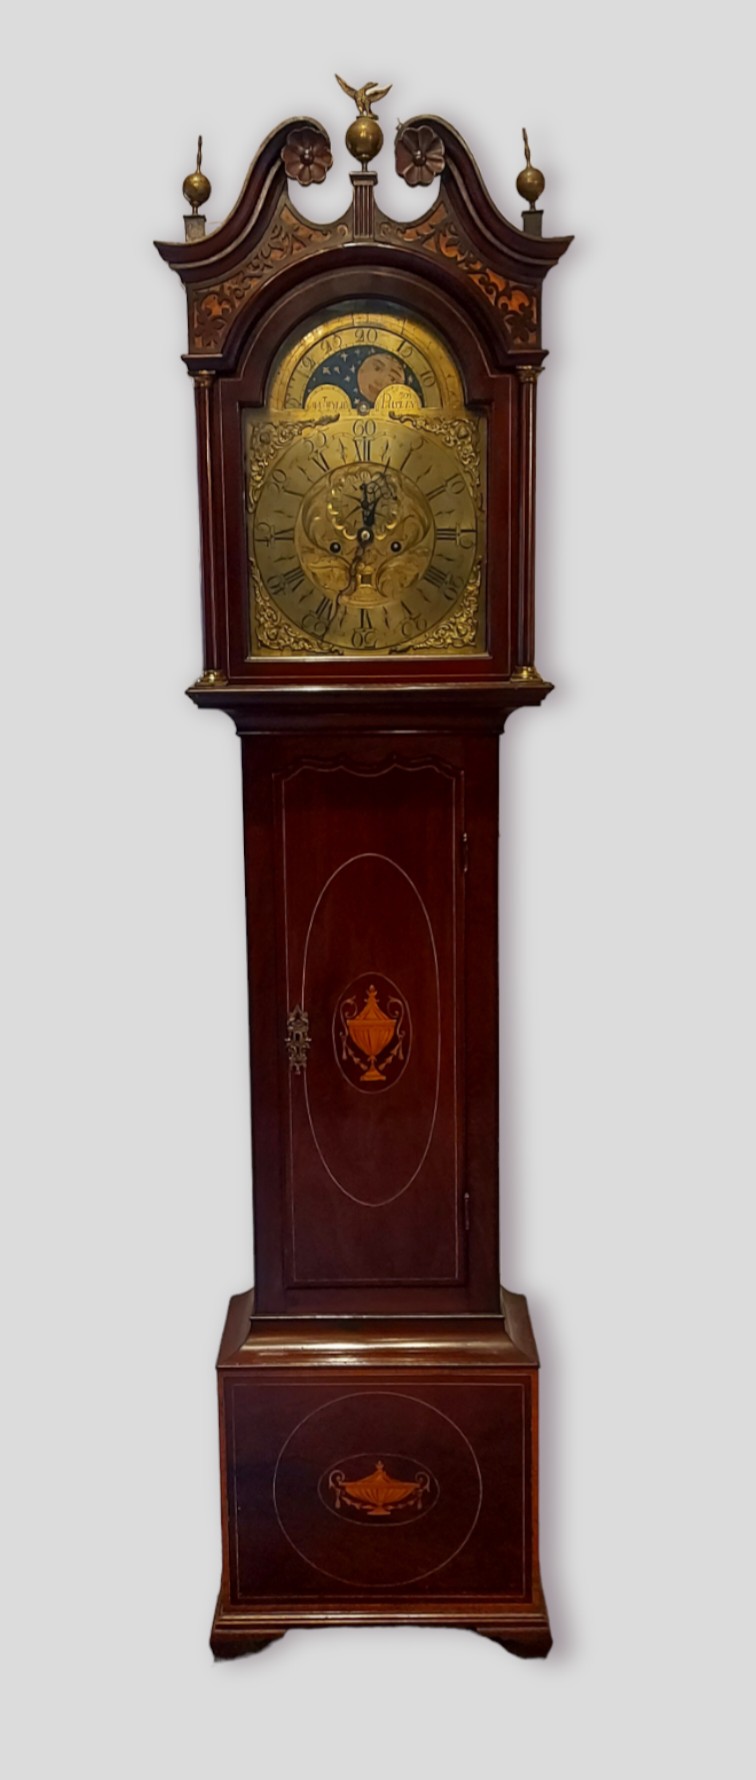 A 19th century mahogany long case clock, the arched hood with swan neck pediment and eagle finials